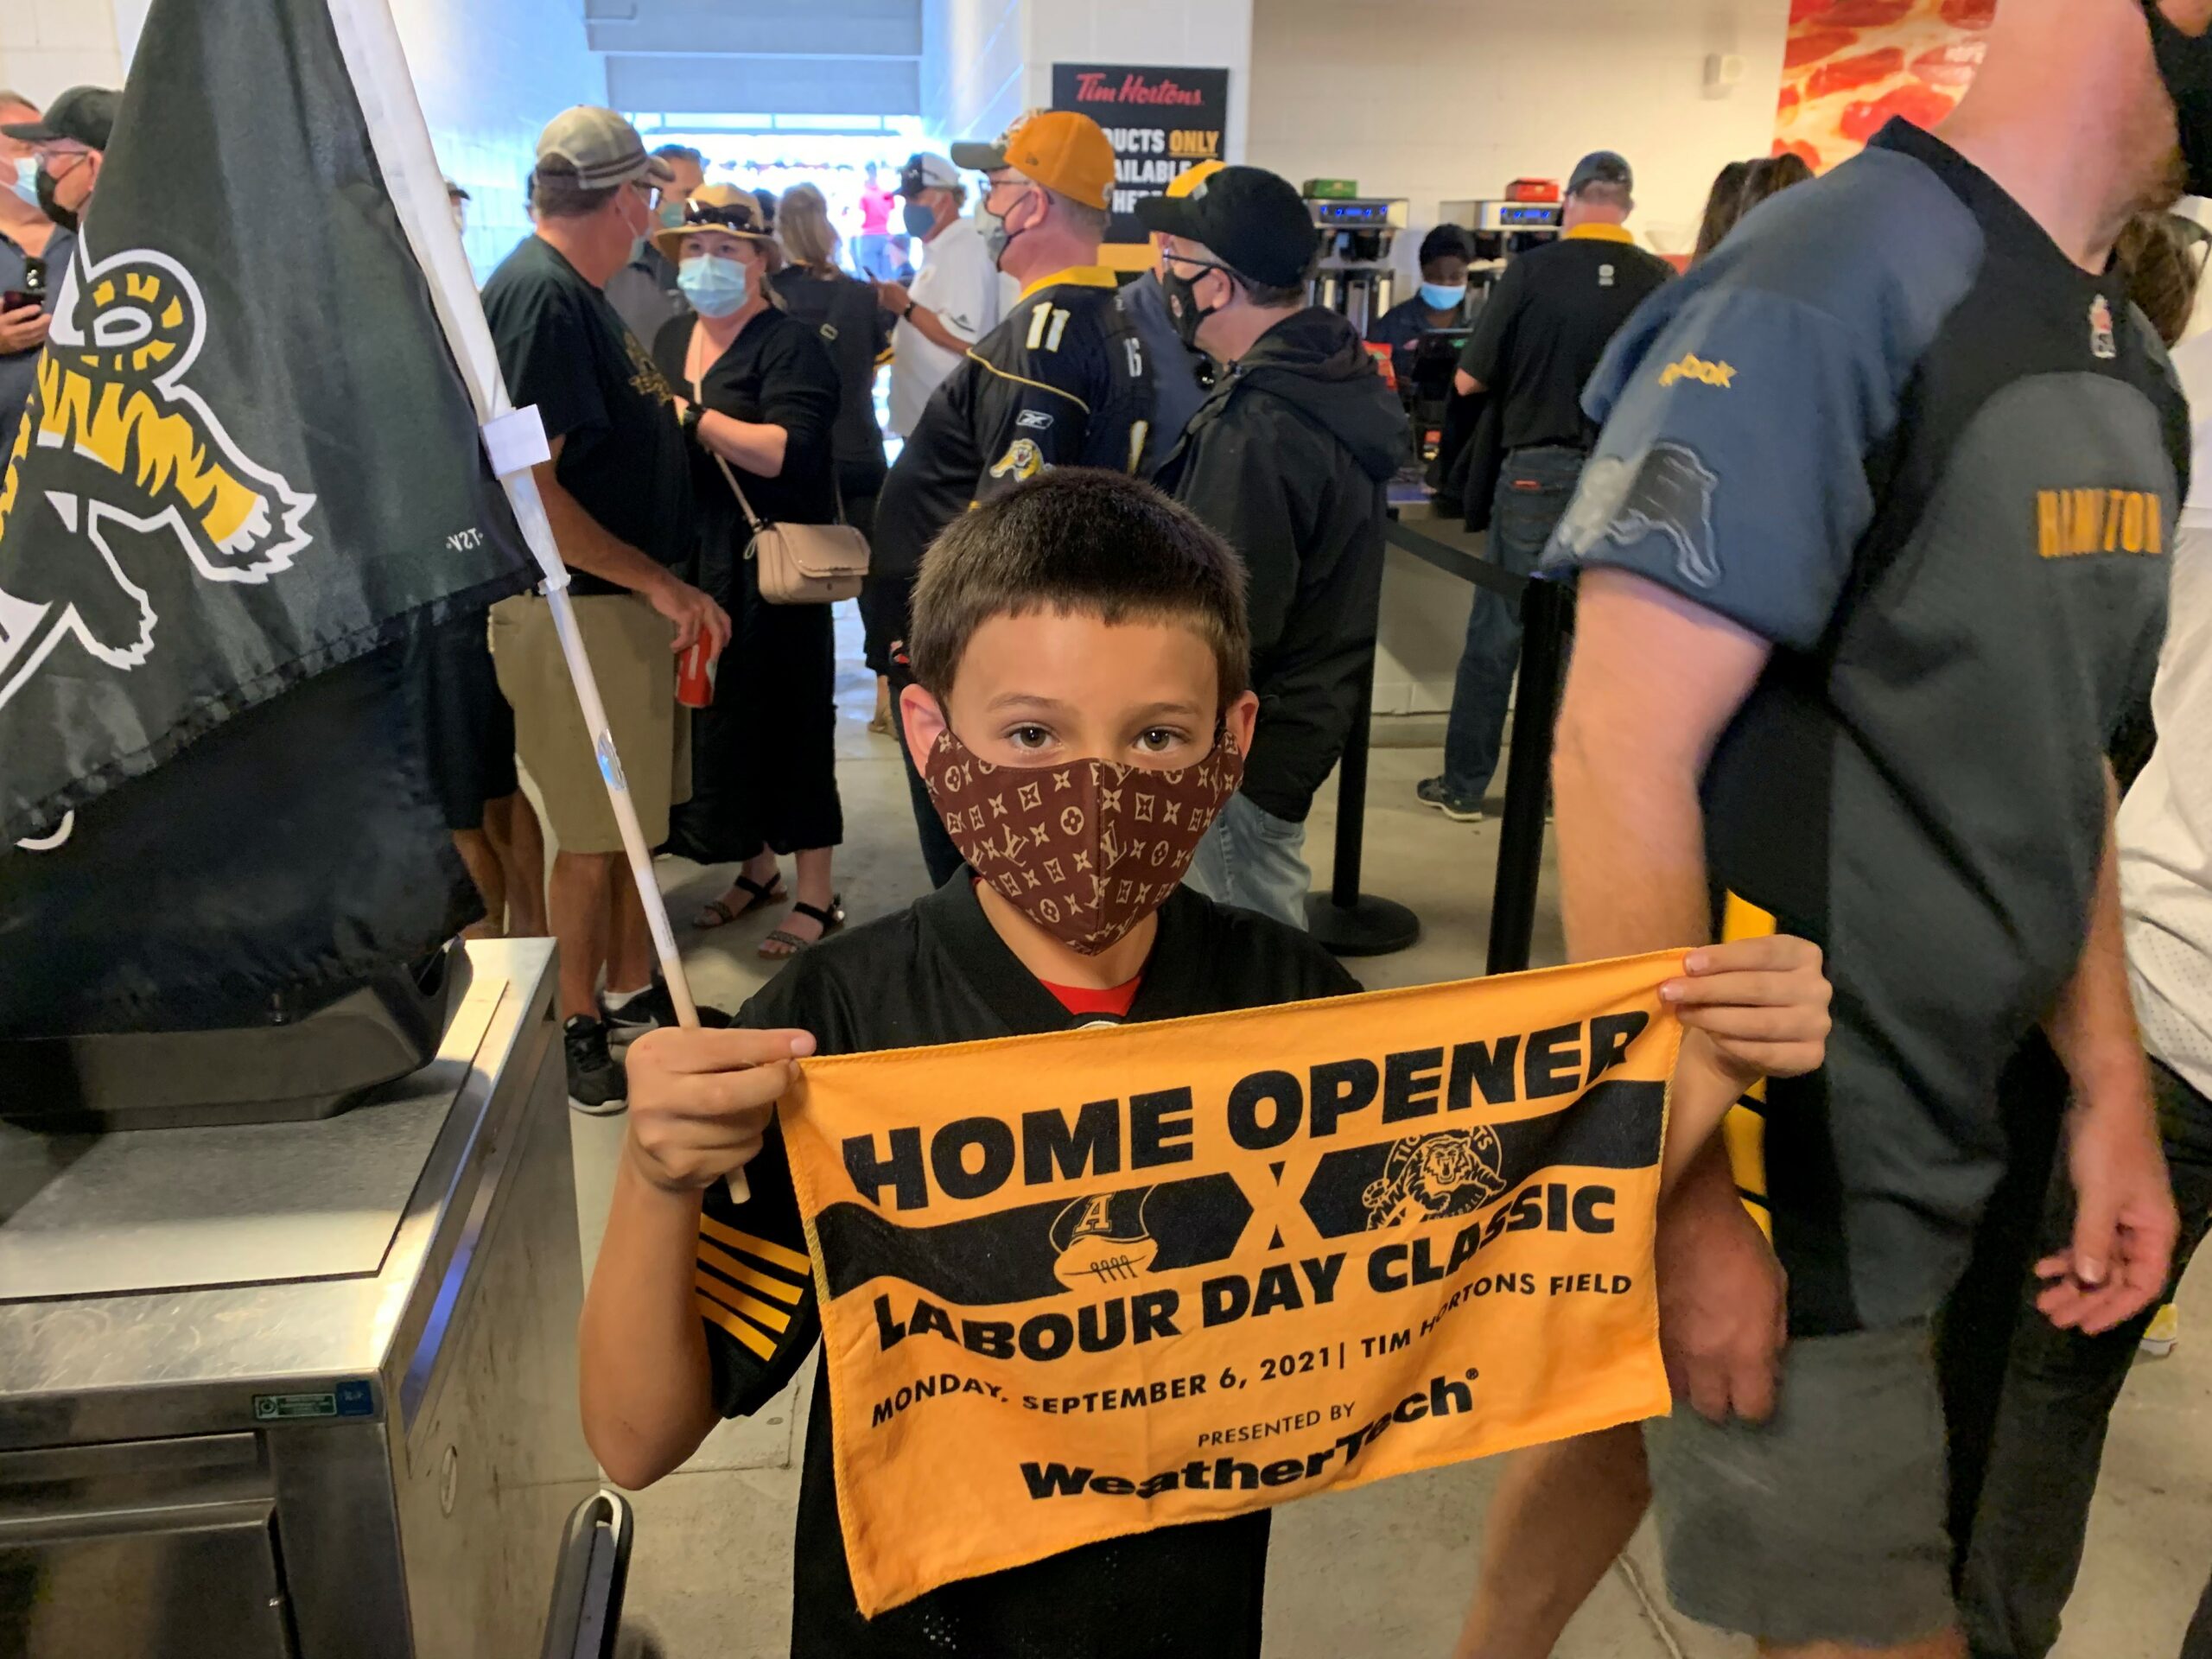 Picture of a young boy at a Hamilton Tiger-Cats football game, in the concourse area.